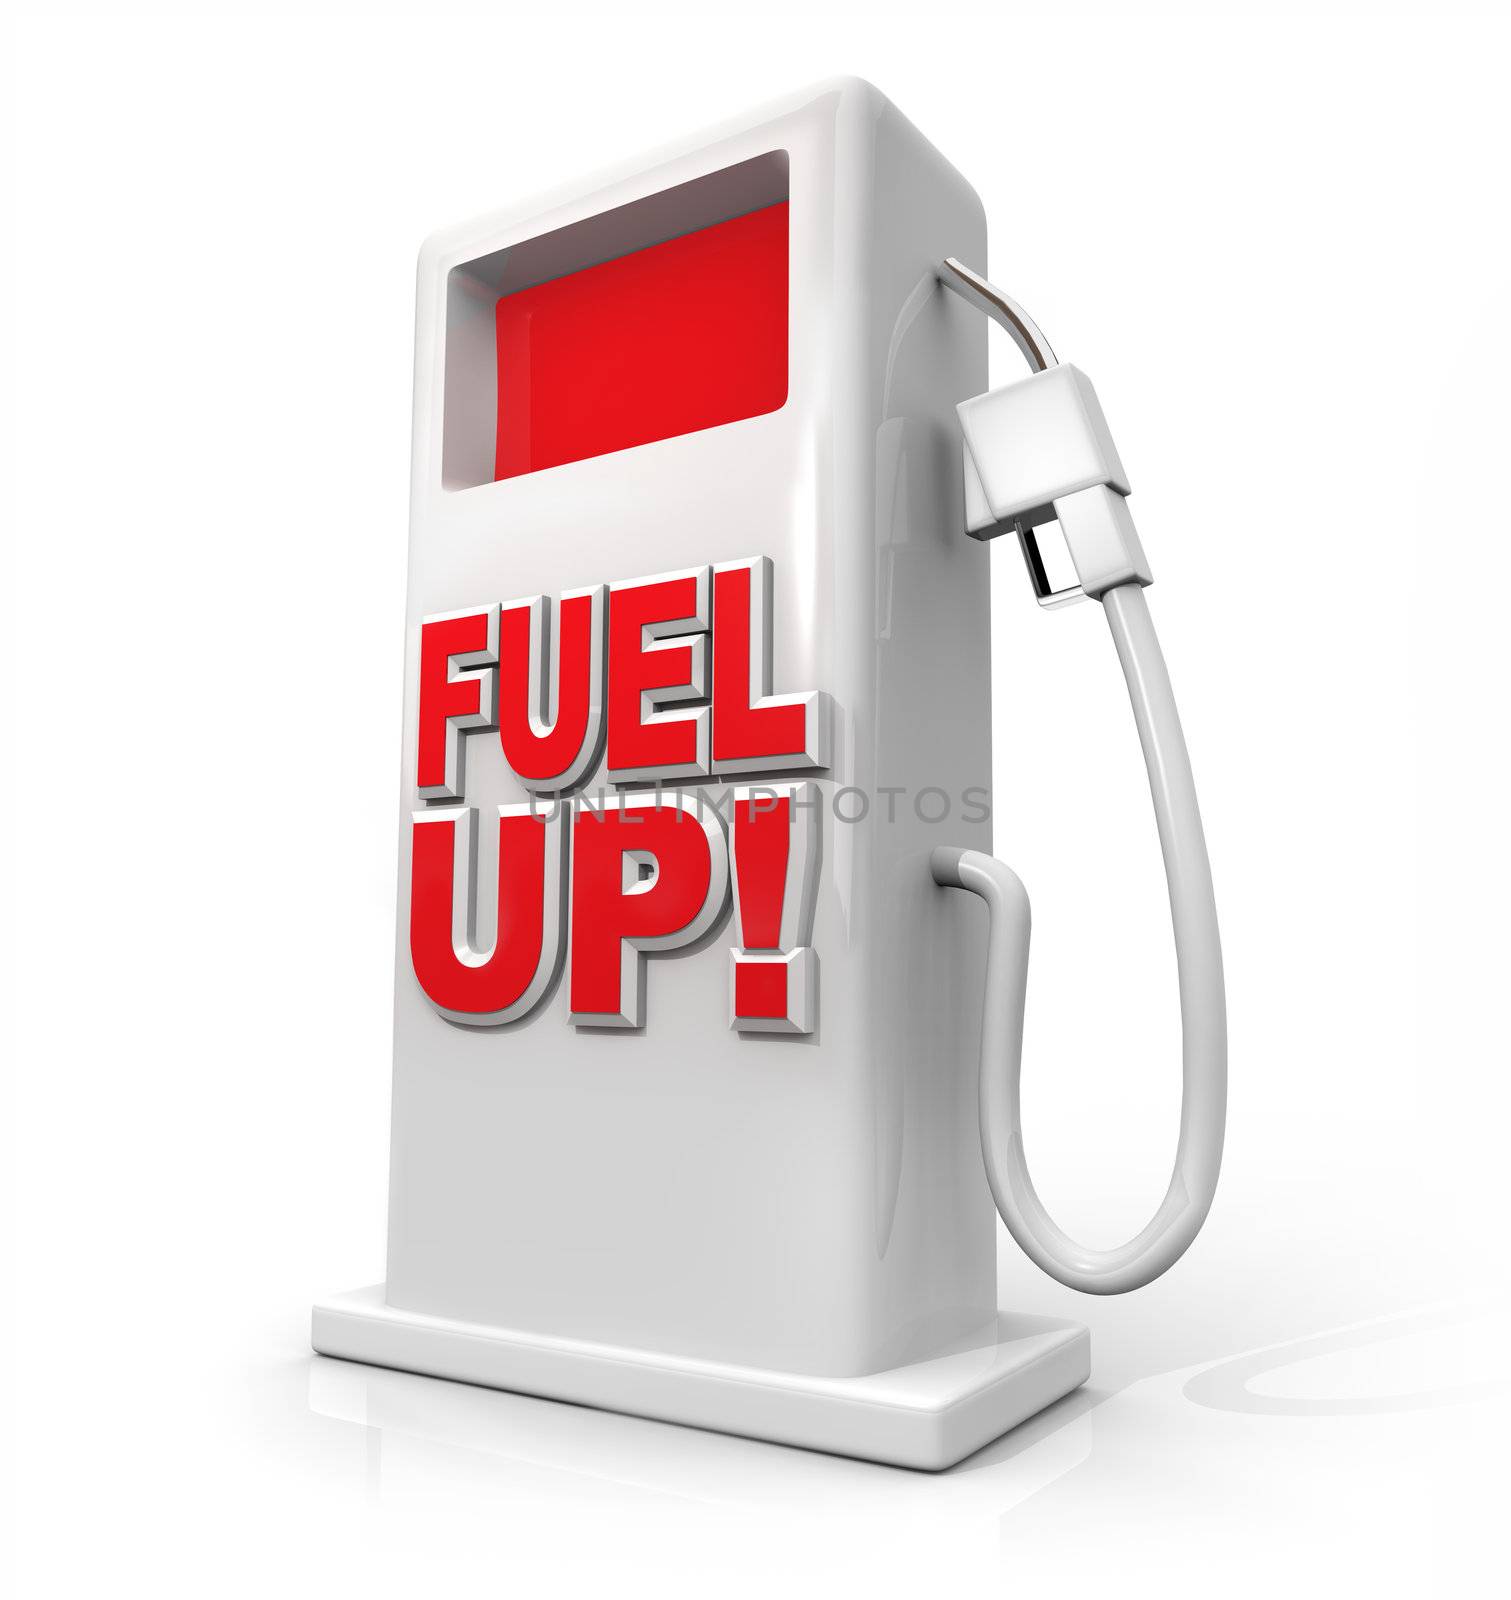 Fuel Up - Gasoline Pump for Refueling by iQoncept